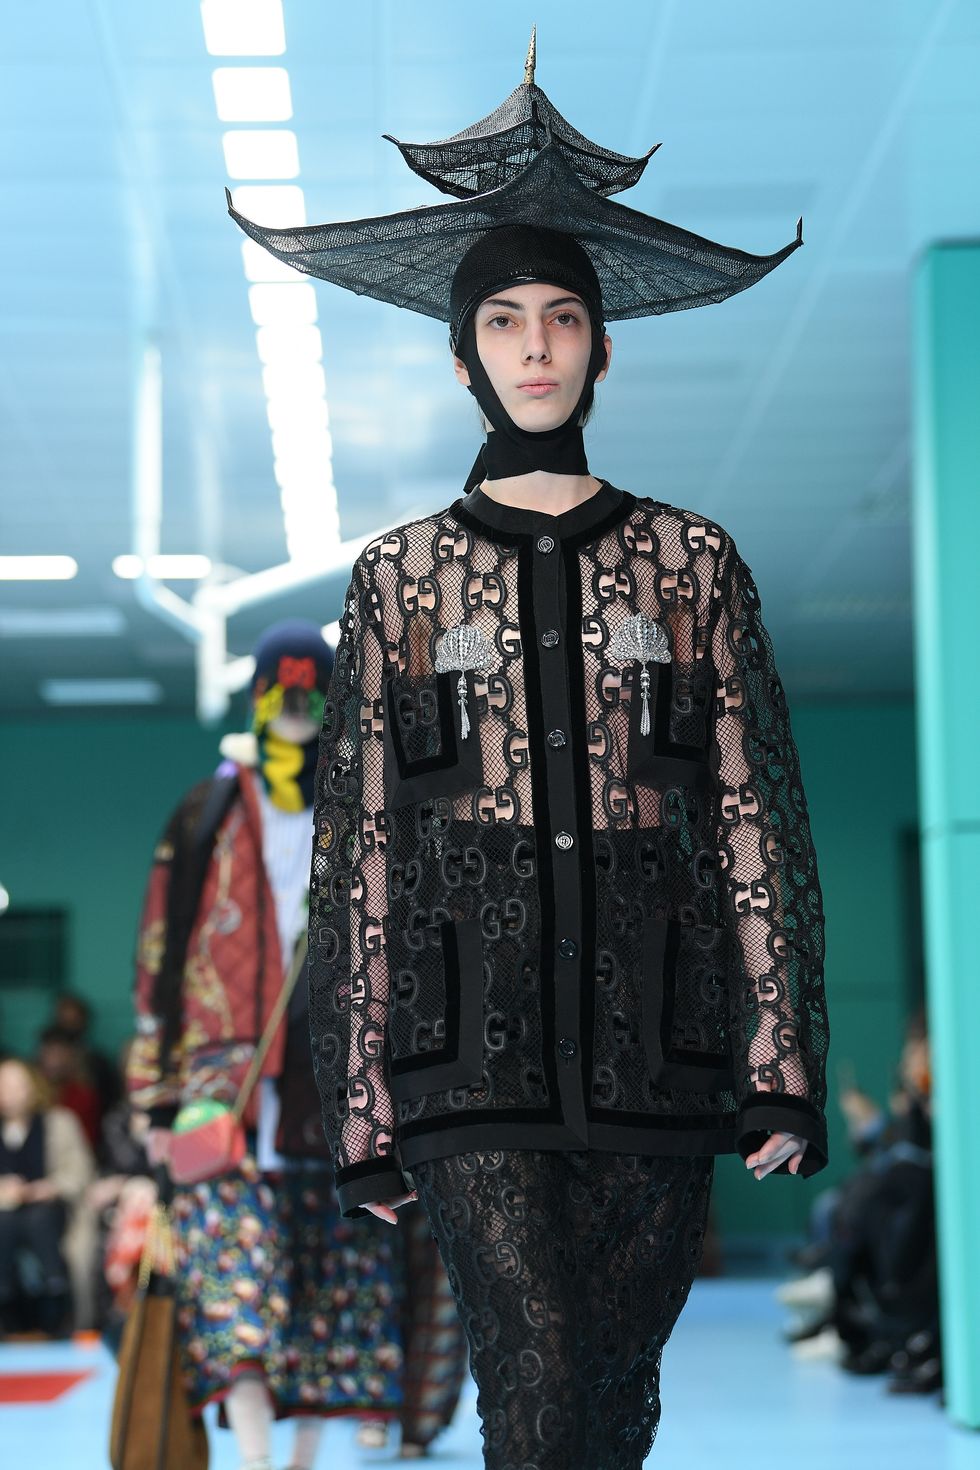 Gucci Fall 2018 Show Human Heads and Dragons - Gucci Models Carried ...